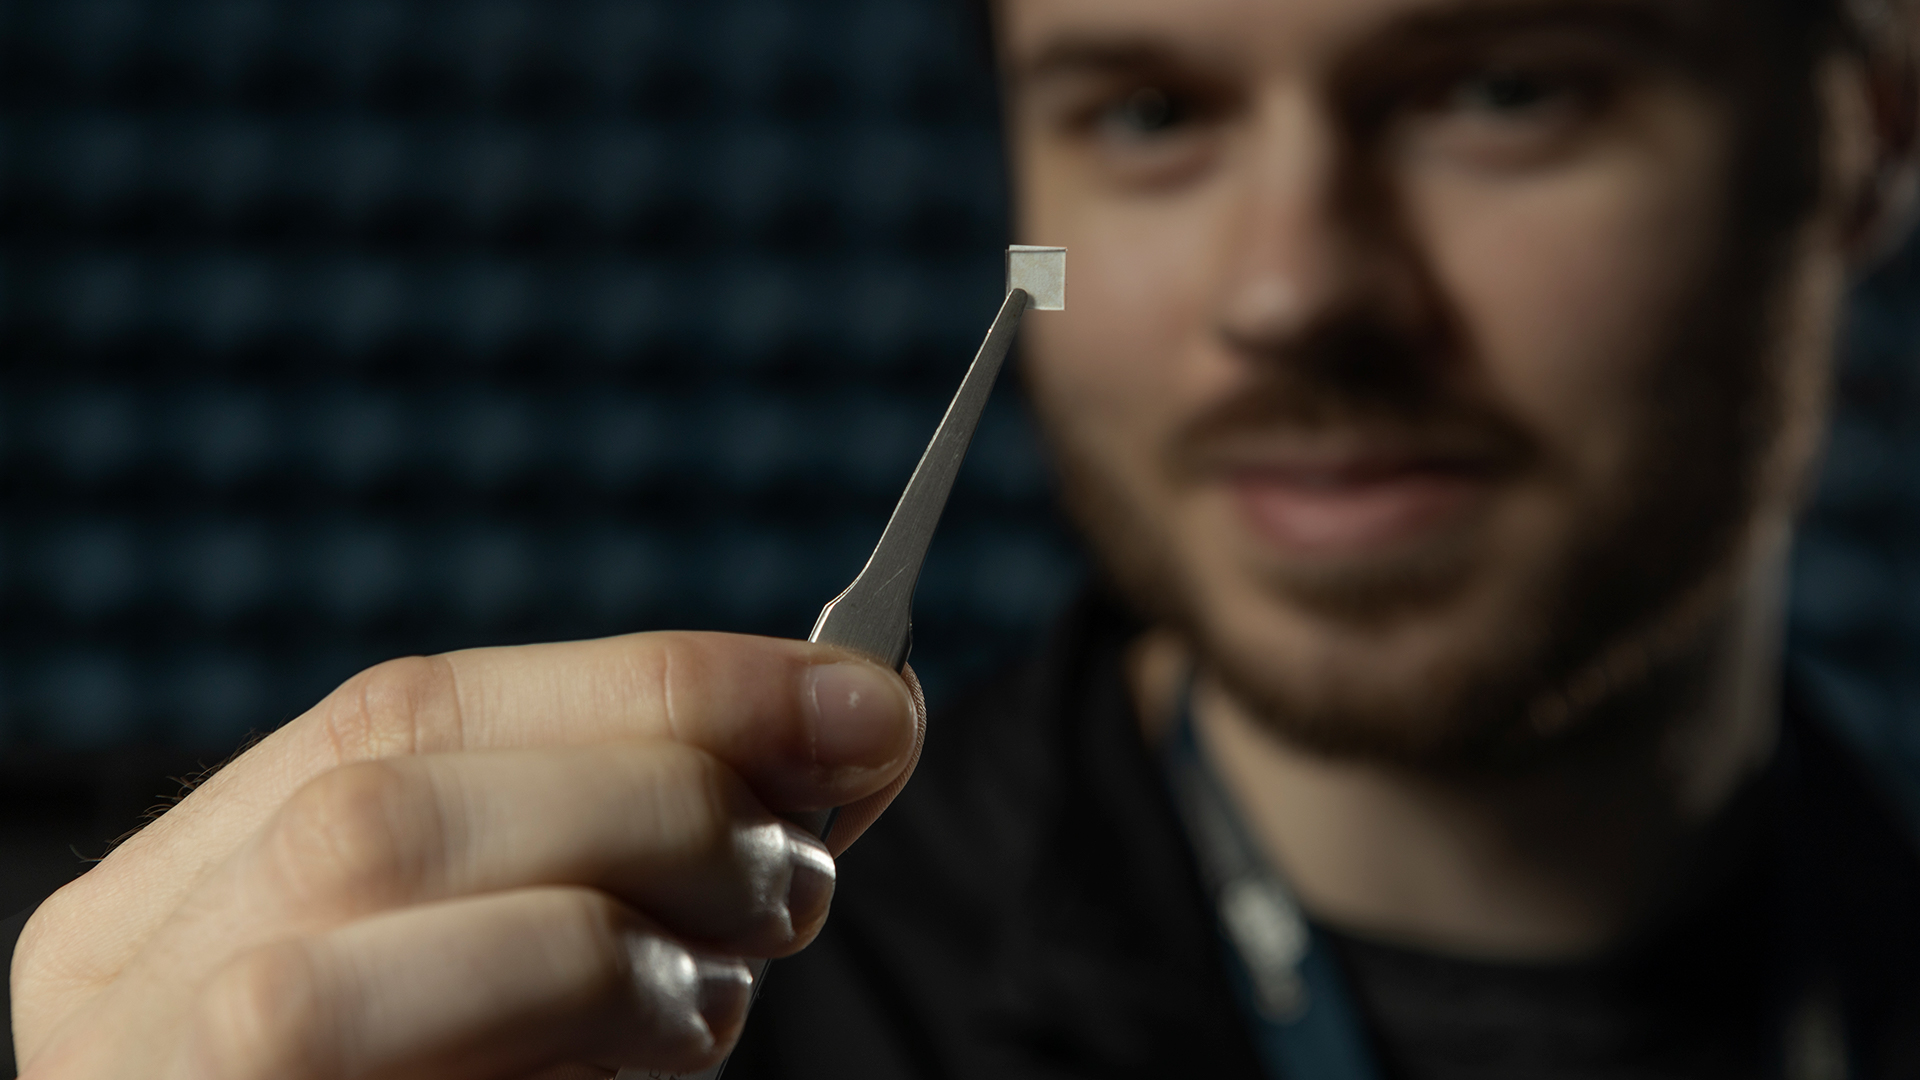 Researcher holds tweezers with small chip up to camera. Room is dark and researcher's face is somewhat obscured.